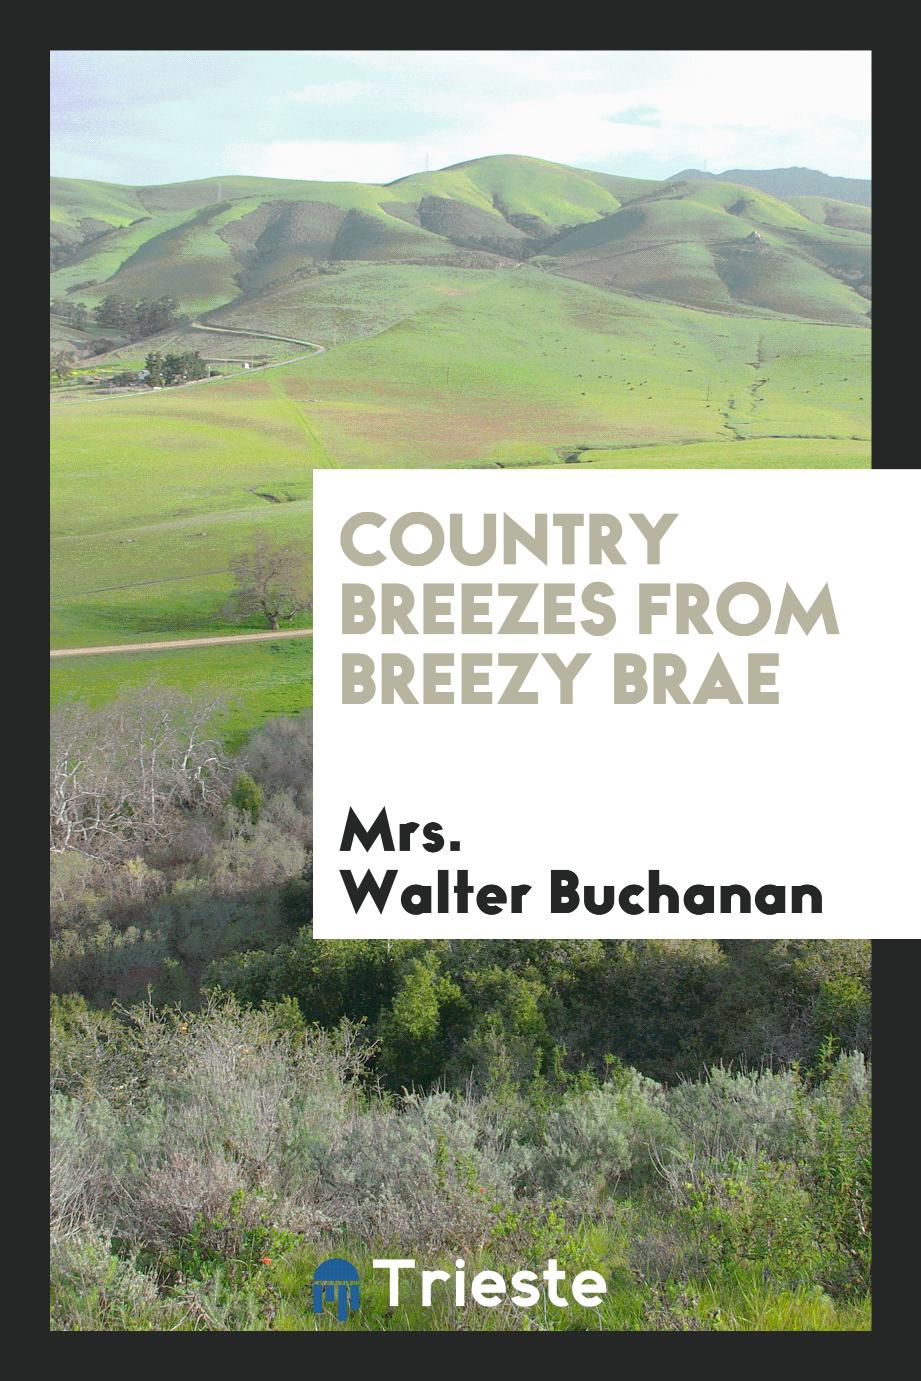 Country breezes from Breezy Brae